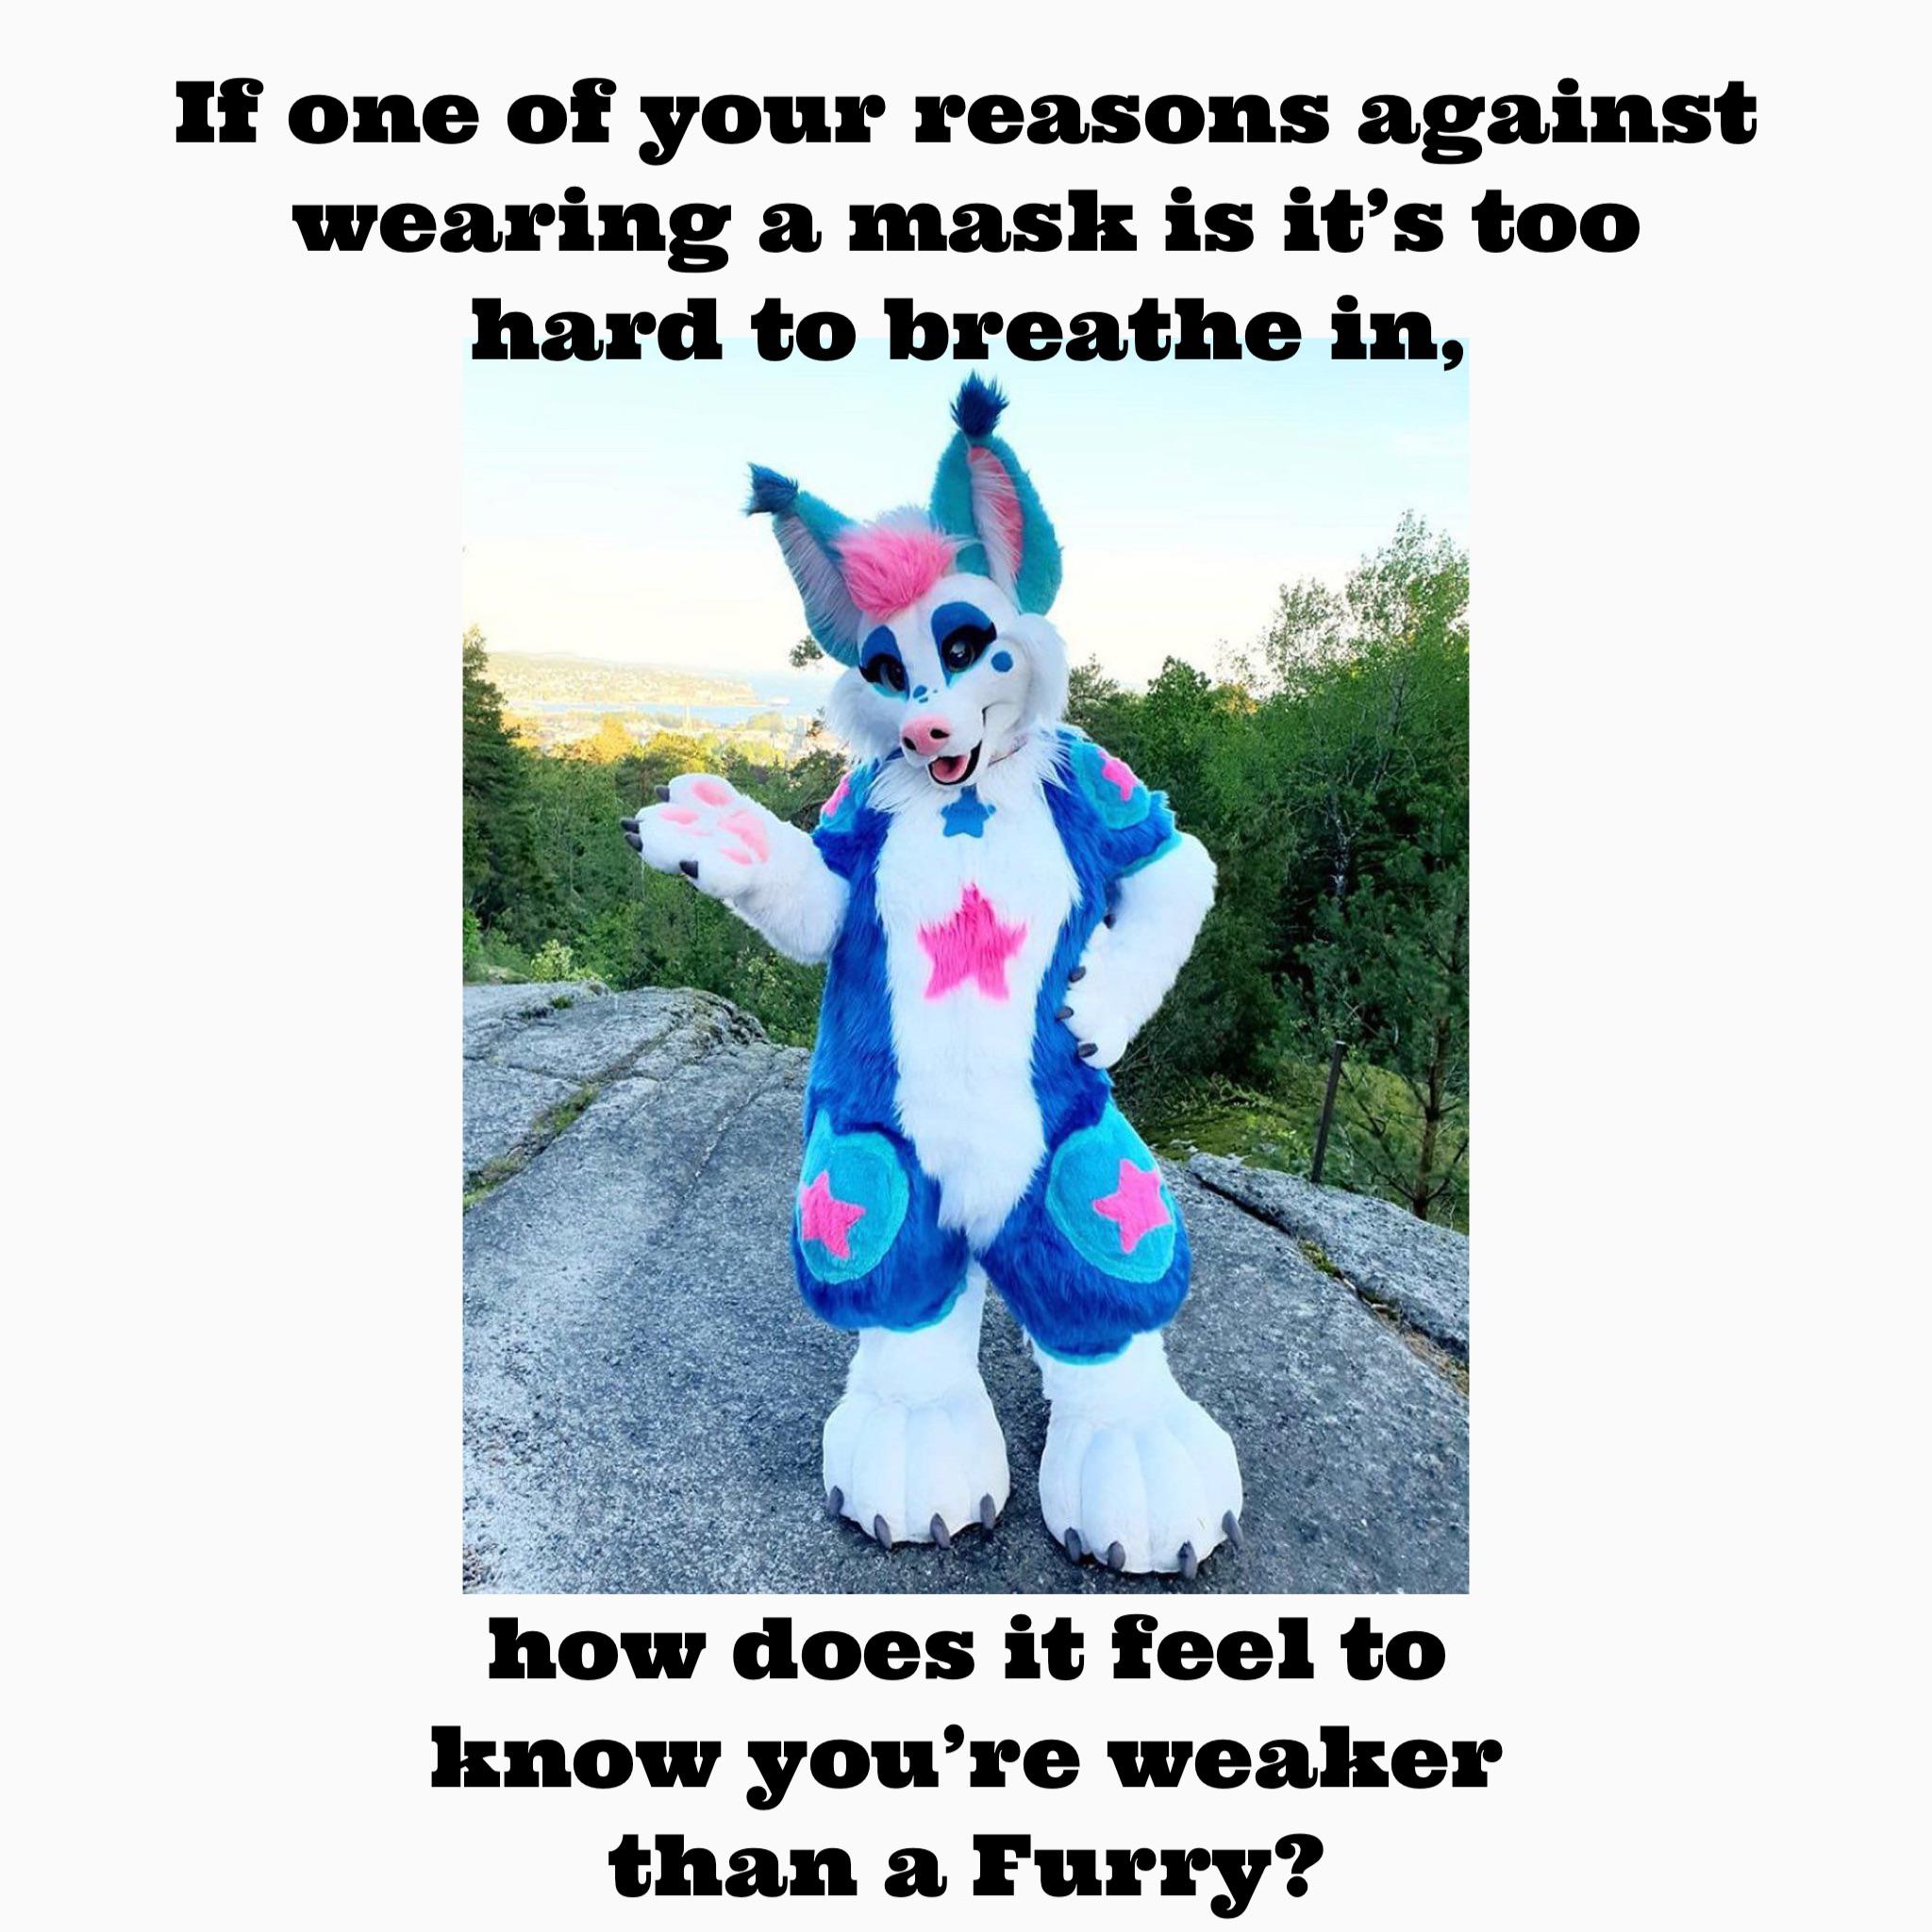 furry costume - If one of your reasons against wearing a mask is it's too hard to breathe in, how does it feel to know you're weaker than a Furry?